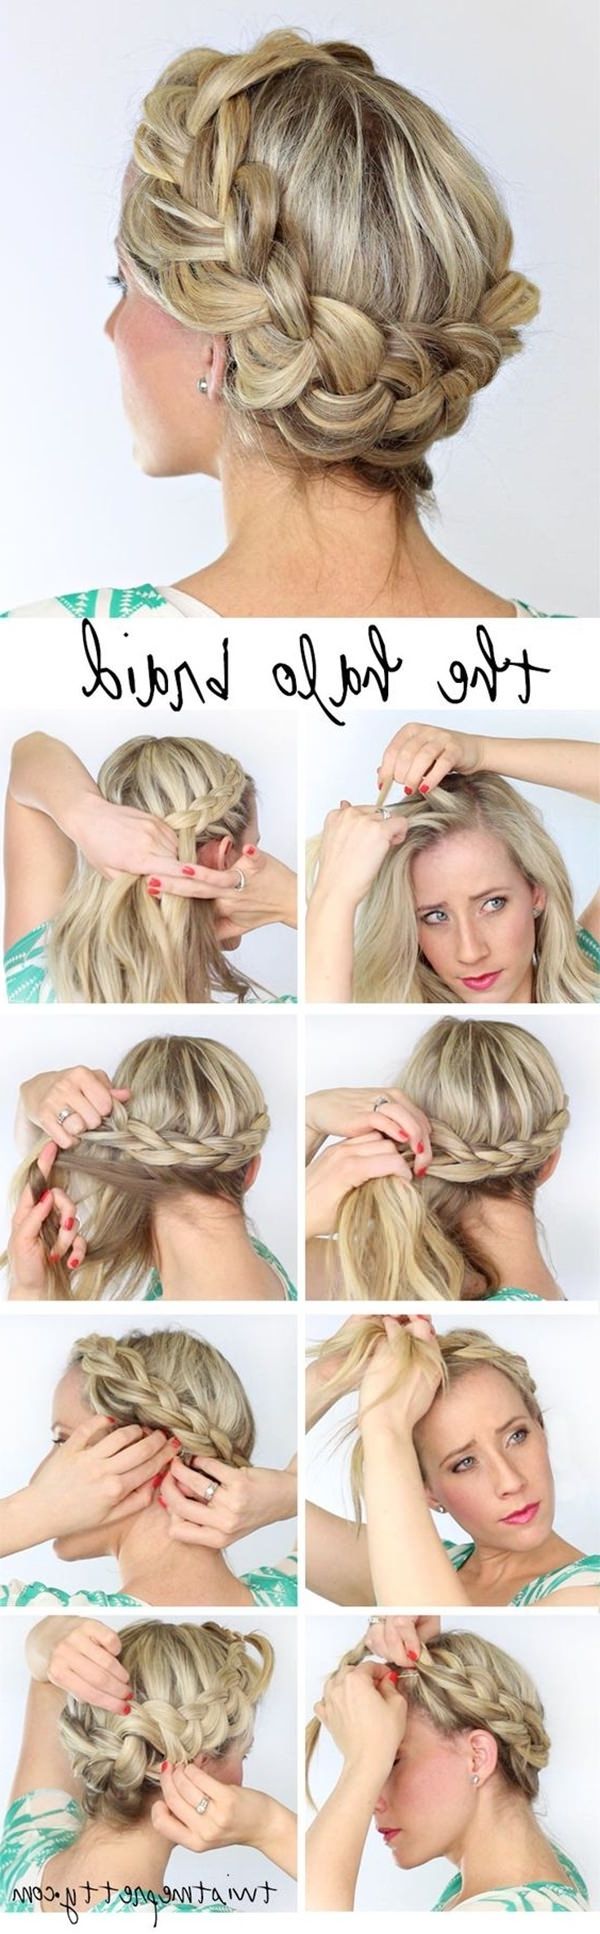 Newest Thick Halo Braid Hairstyles Throughout 66 Stunning Halo Braid Ideas That You Will Love (View 8 of 15)